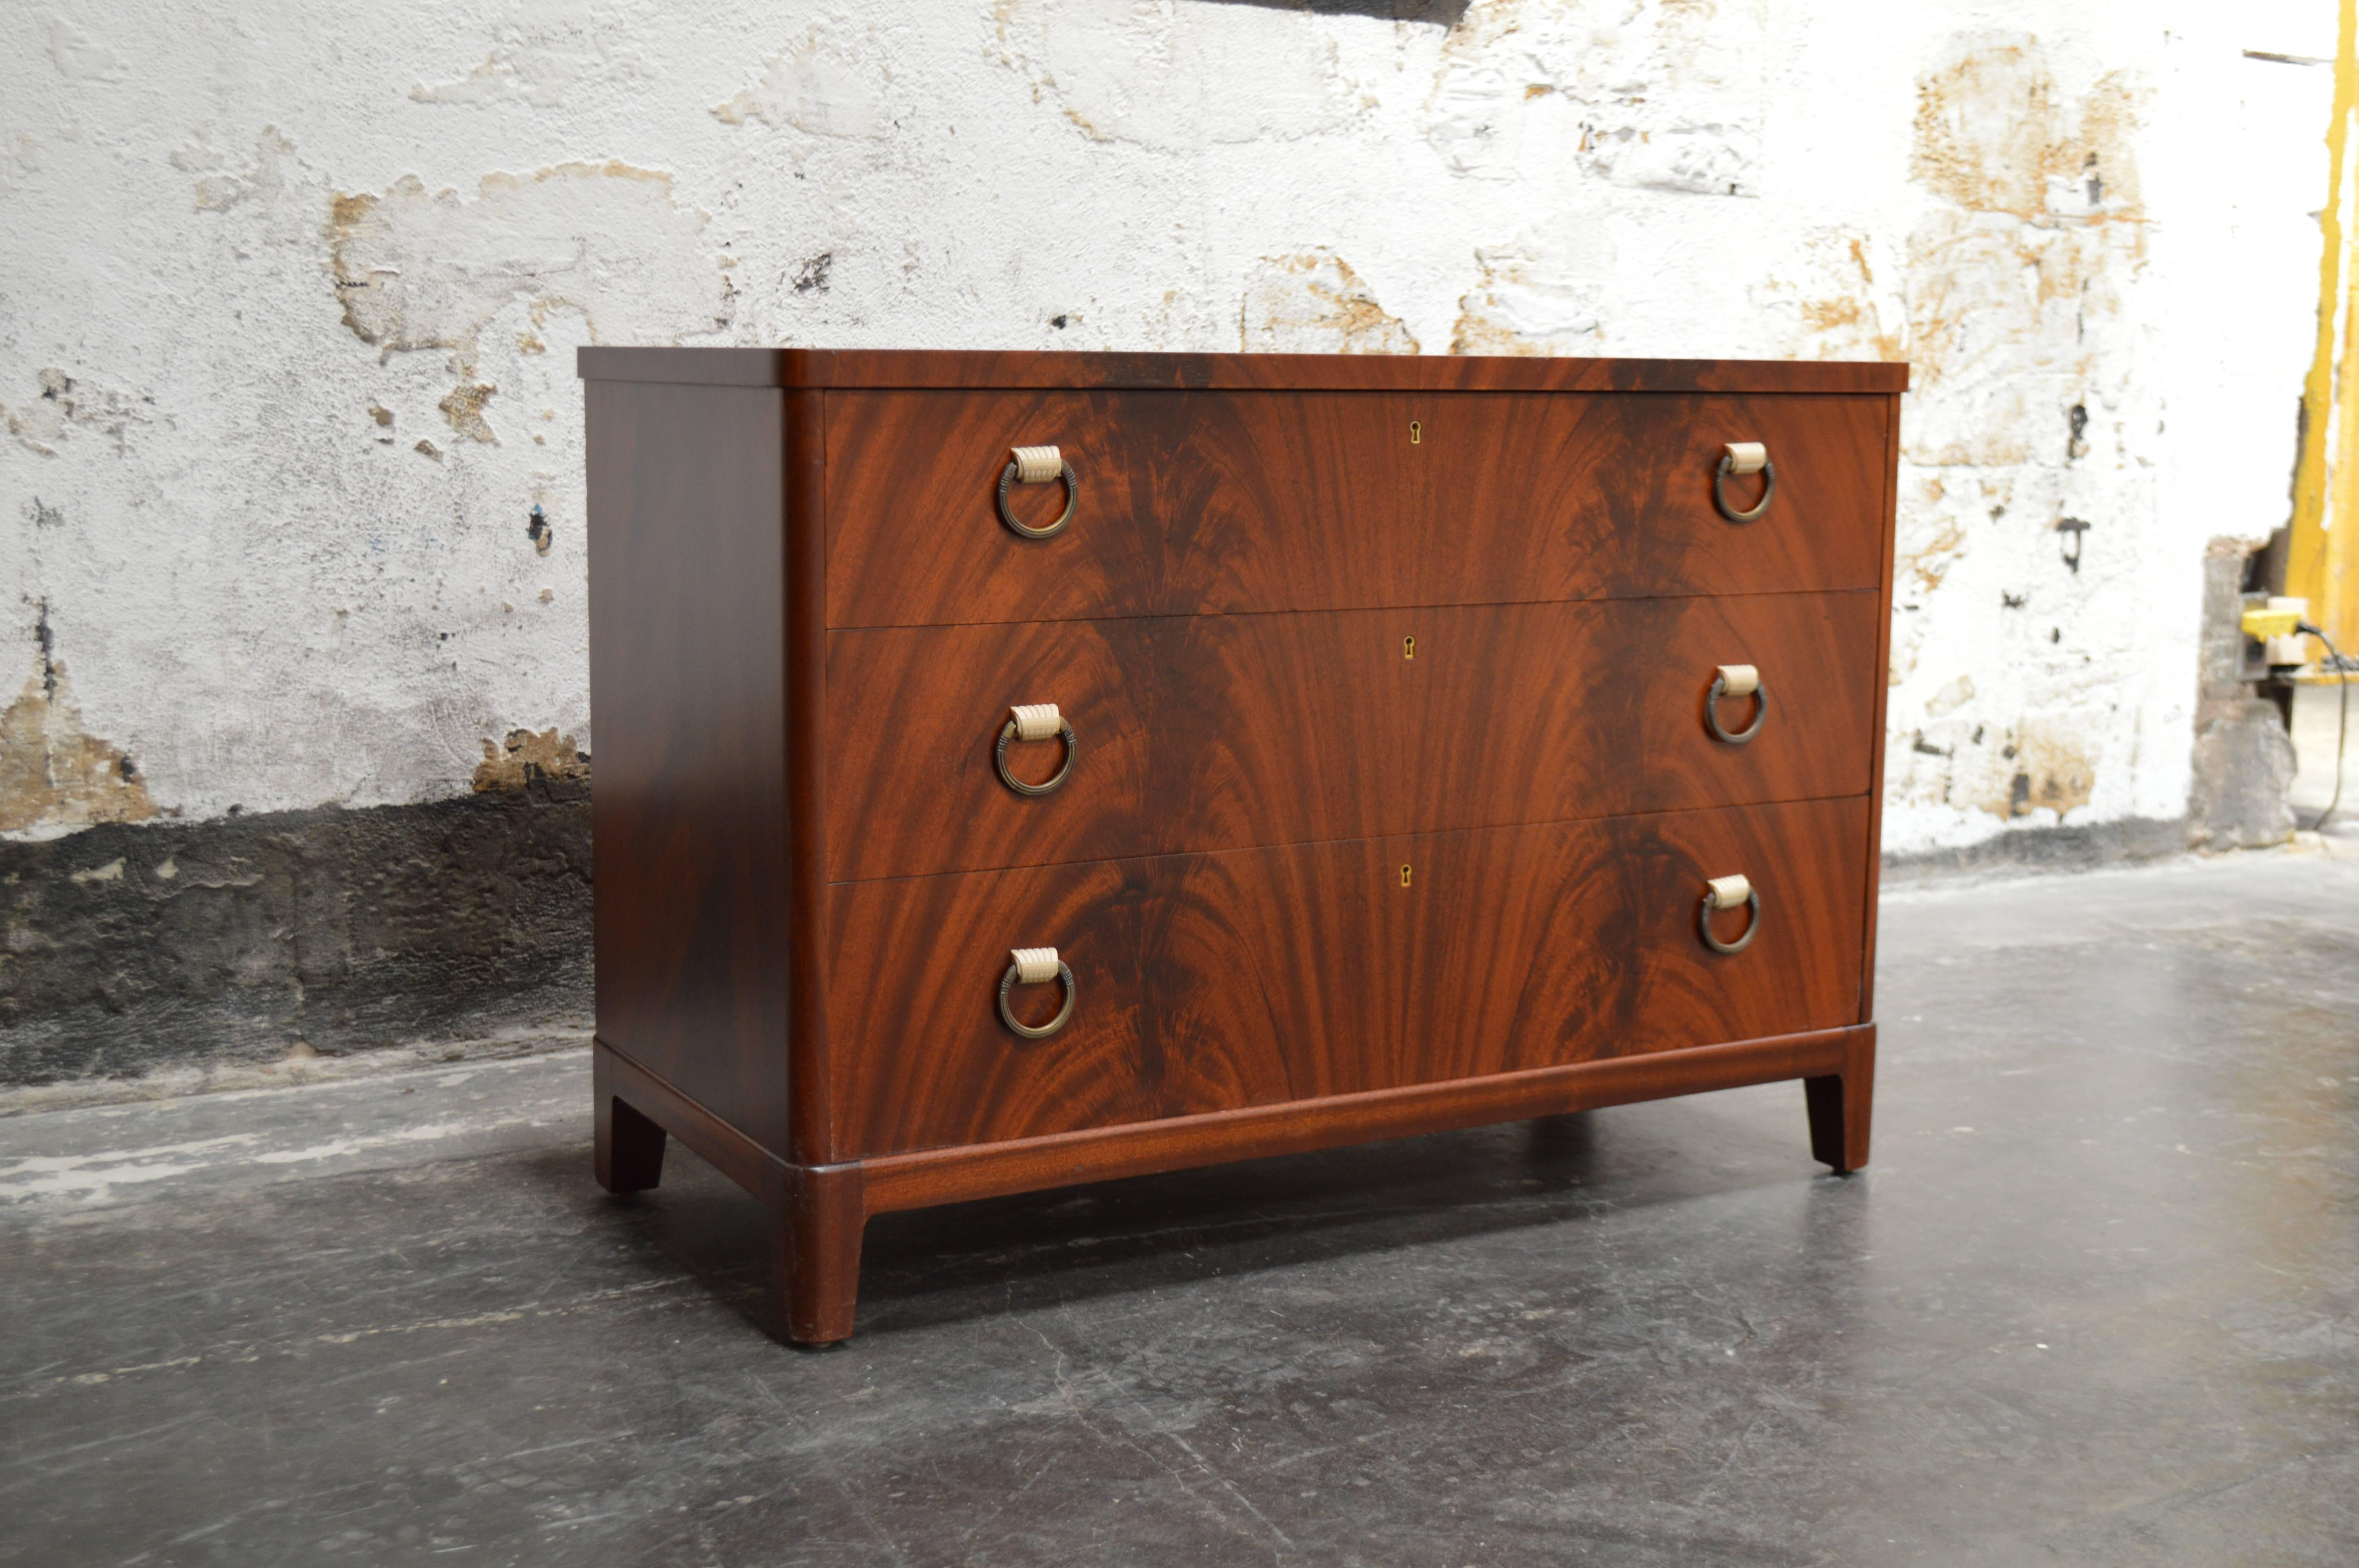 Swedish Art Deco chest fitted with three spacious drawers in beautiful bookmatched mahogany with. This chest has nickel pulls with ivory color bakelite details. Perfectly scaled for just about anywhere in the home.